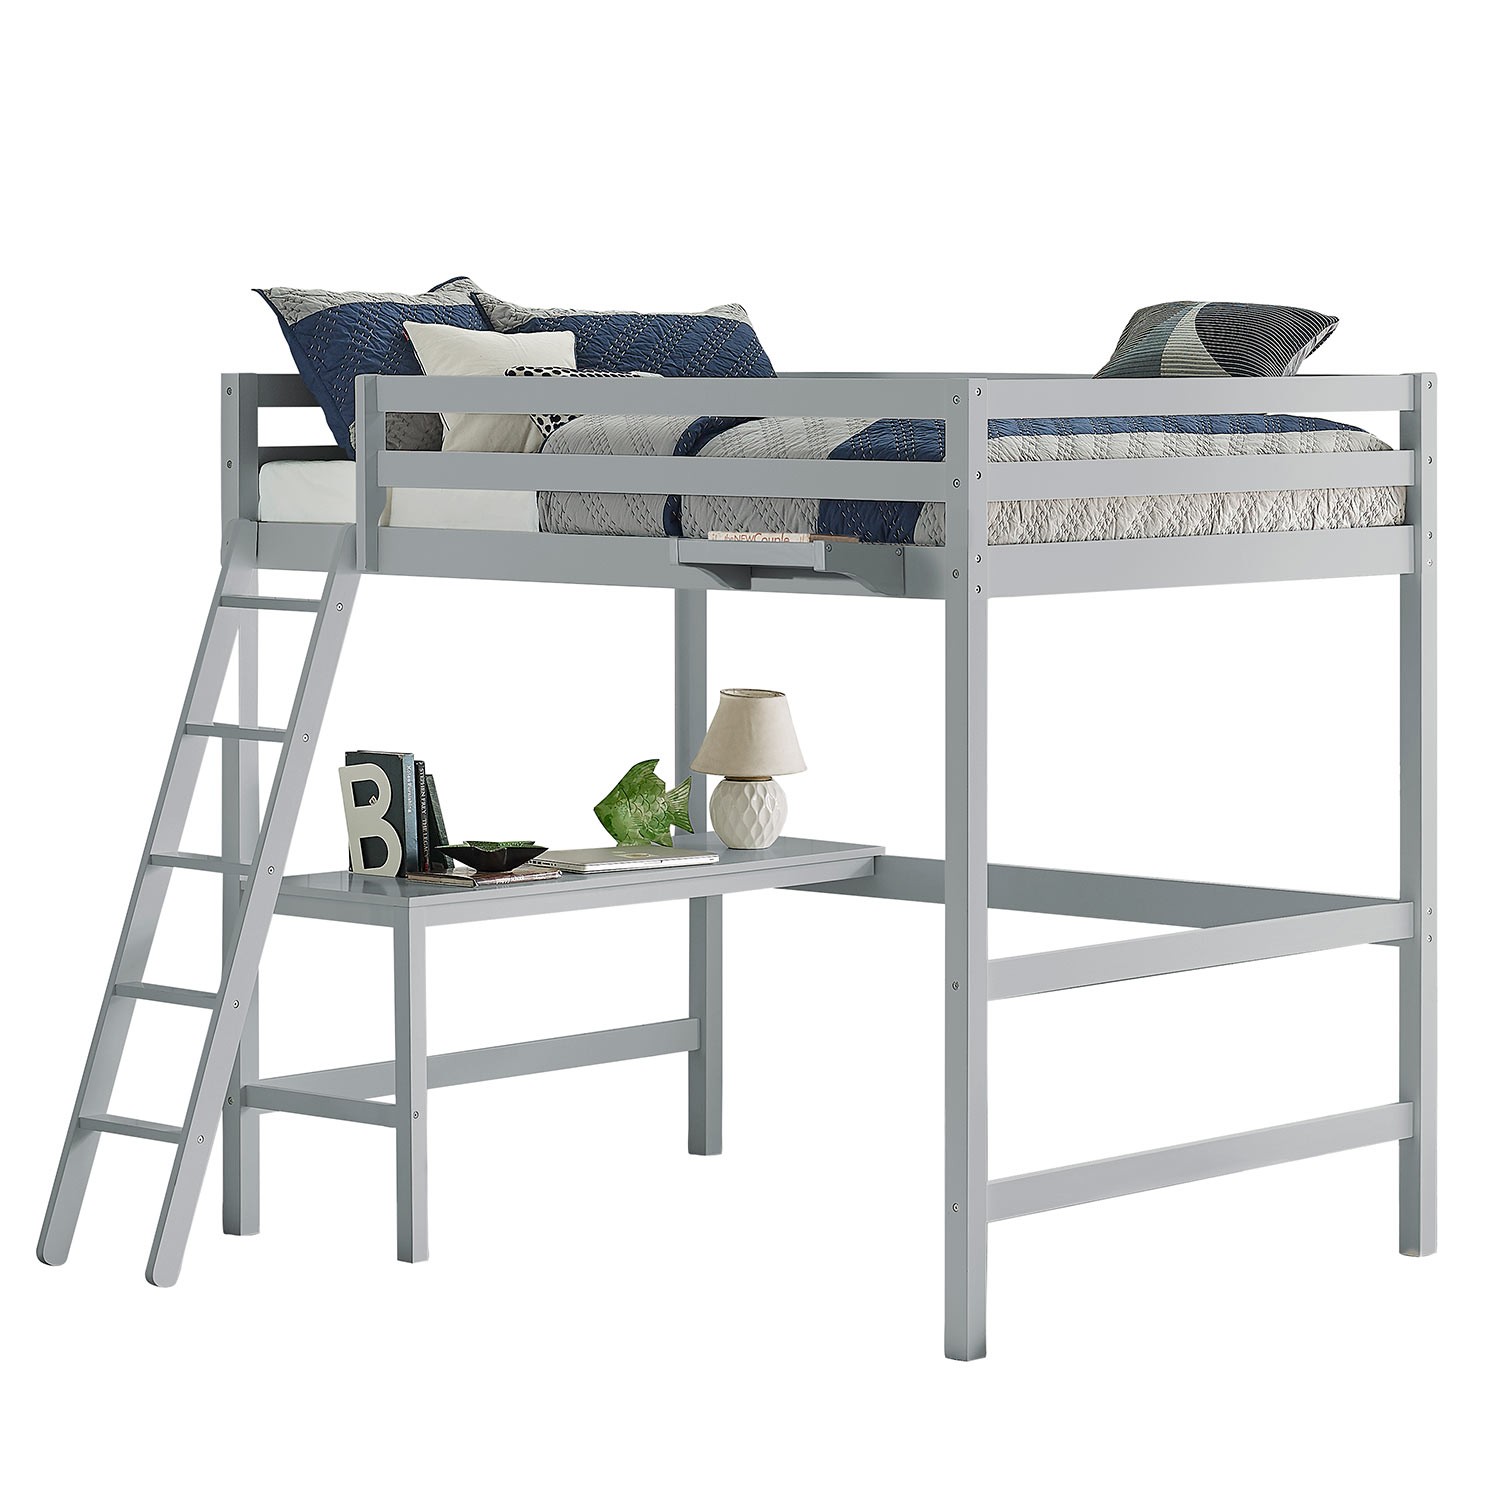 Hillsdale Caspian Full Loft Bed with Hanging Nightstand - Gray